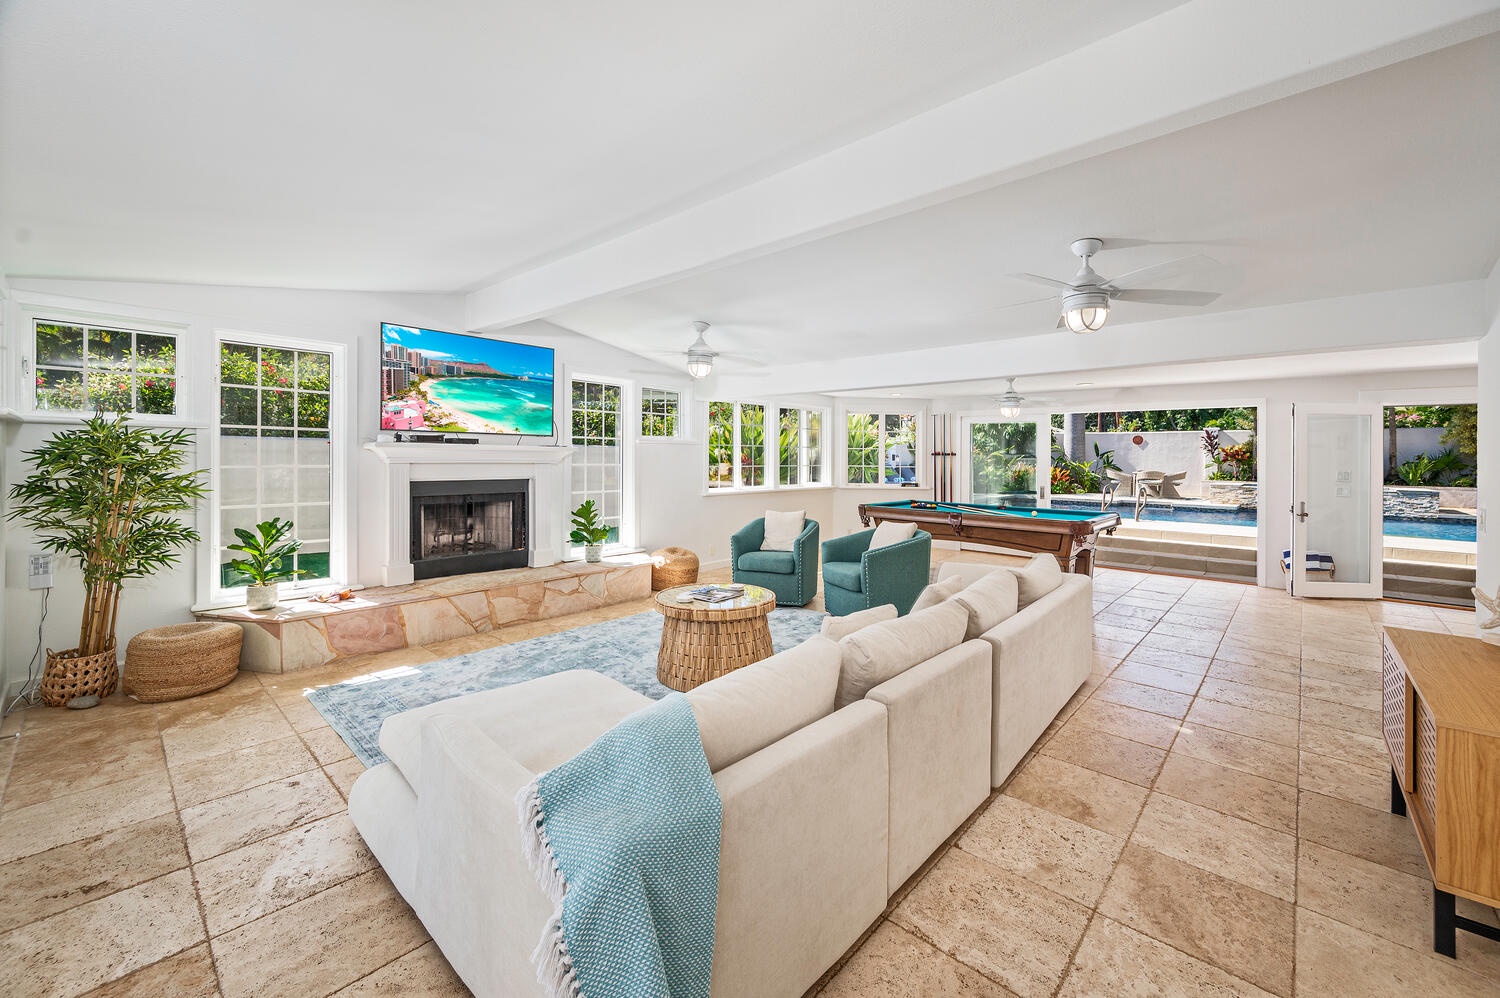 Kailua Vacation Rentals, Villa Hui Hou - Enjoy the islands cross breeze in the main living-room, complete with pool table and a front porch to watch the basketball players in the group!